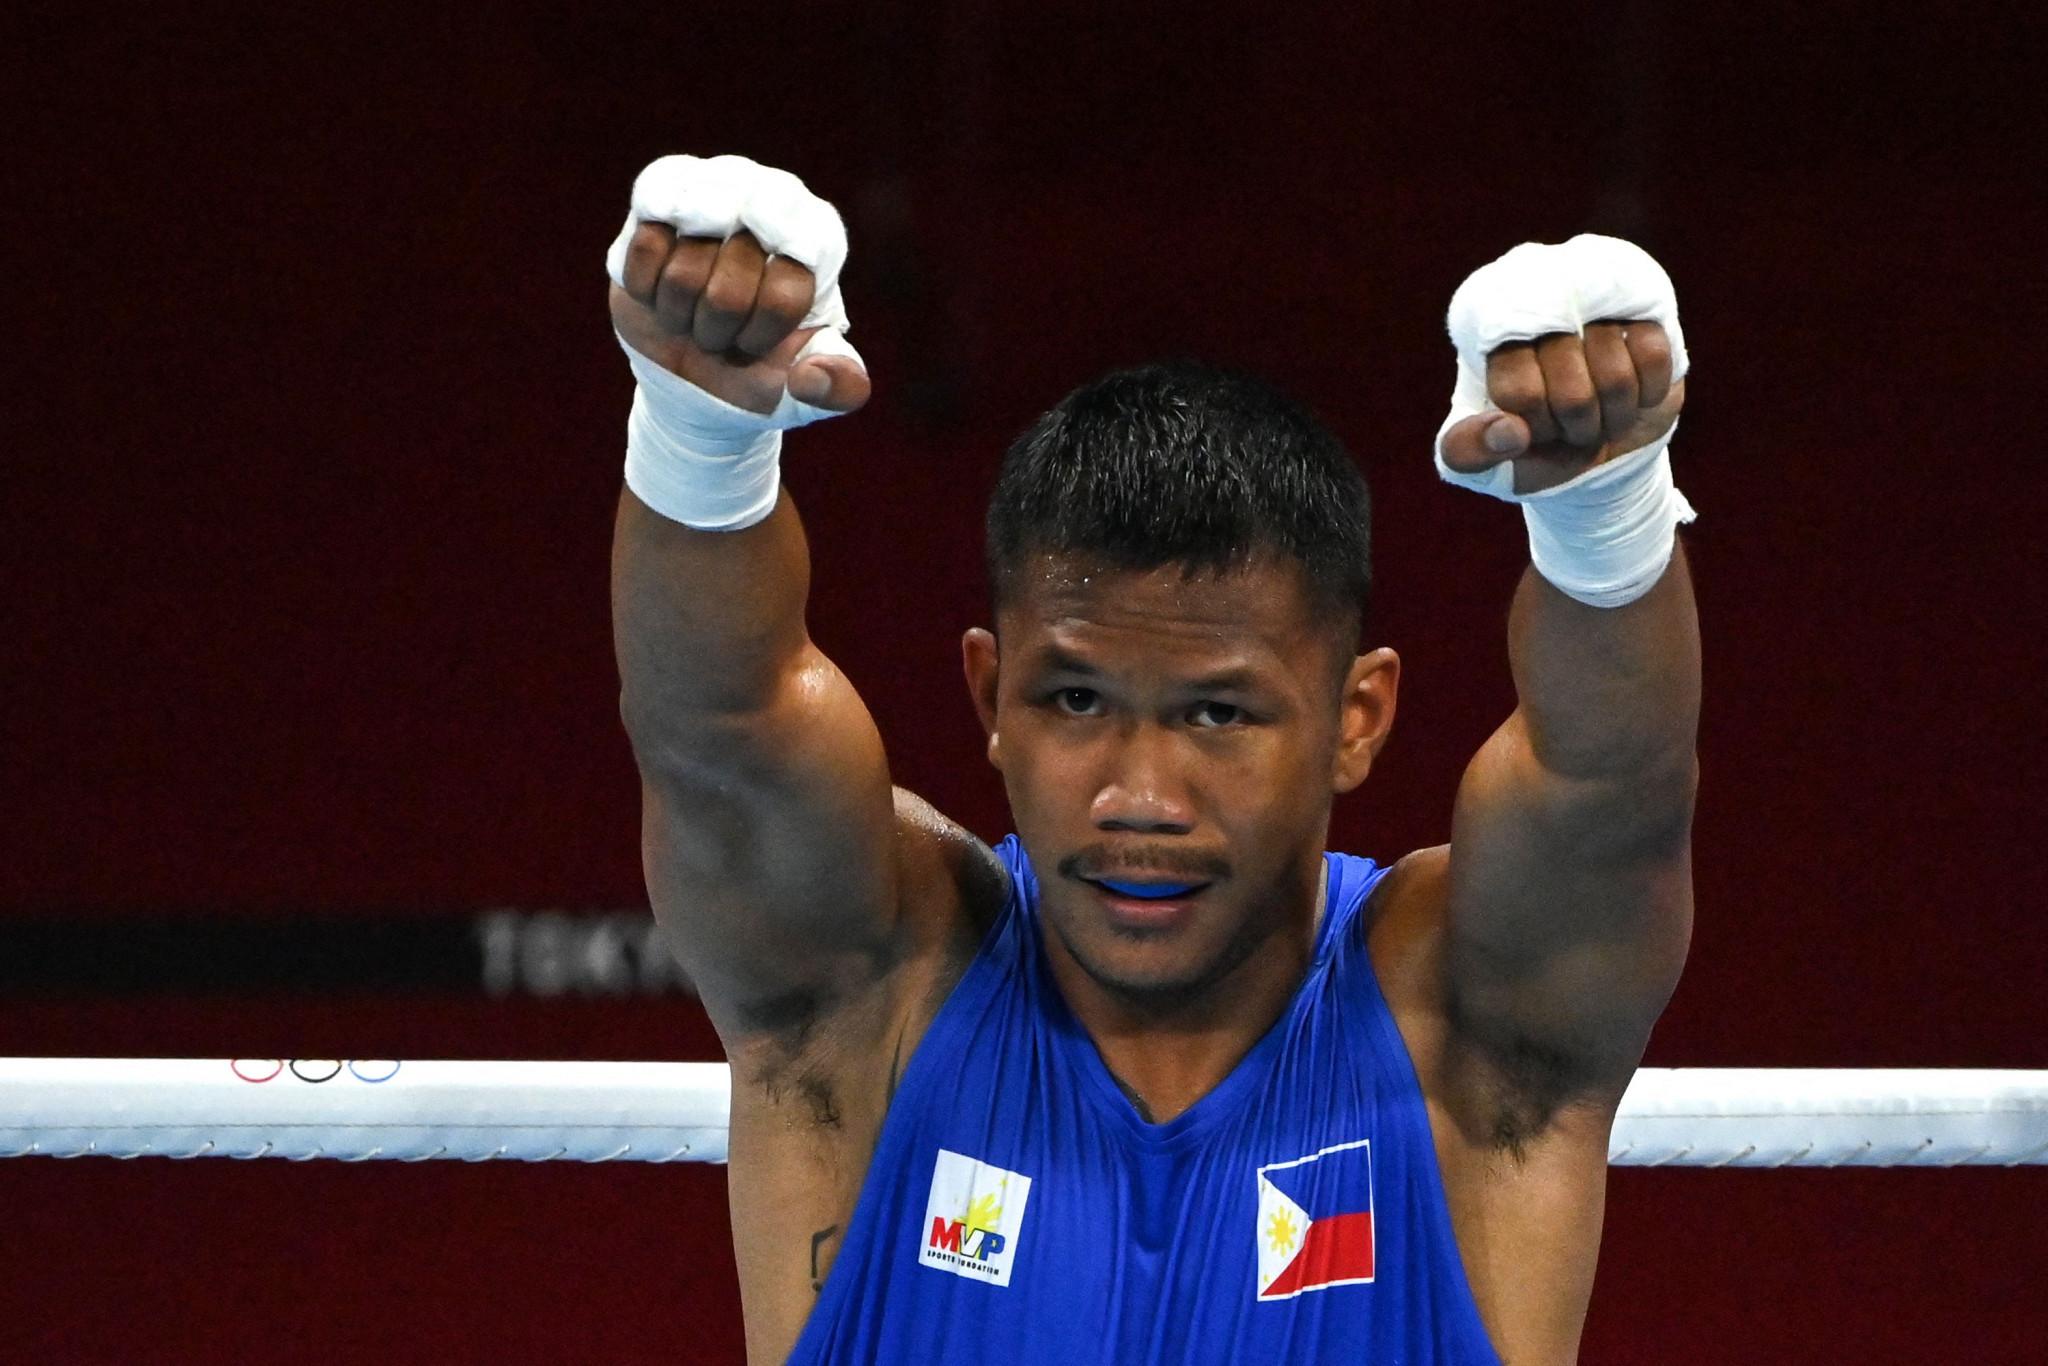 Eumir Marcial is one of the Olympic medallists on the World Championships entry list ©Getty Images